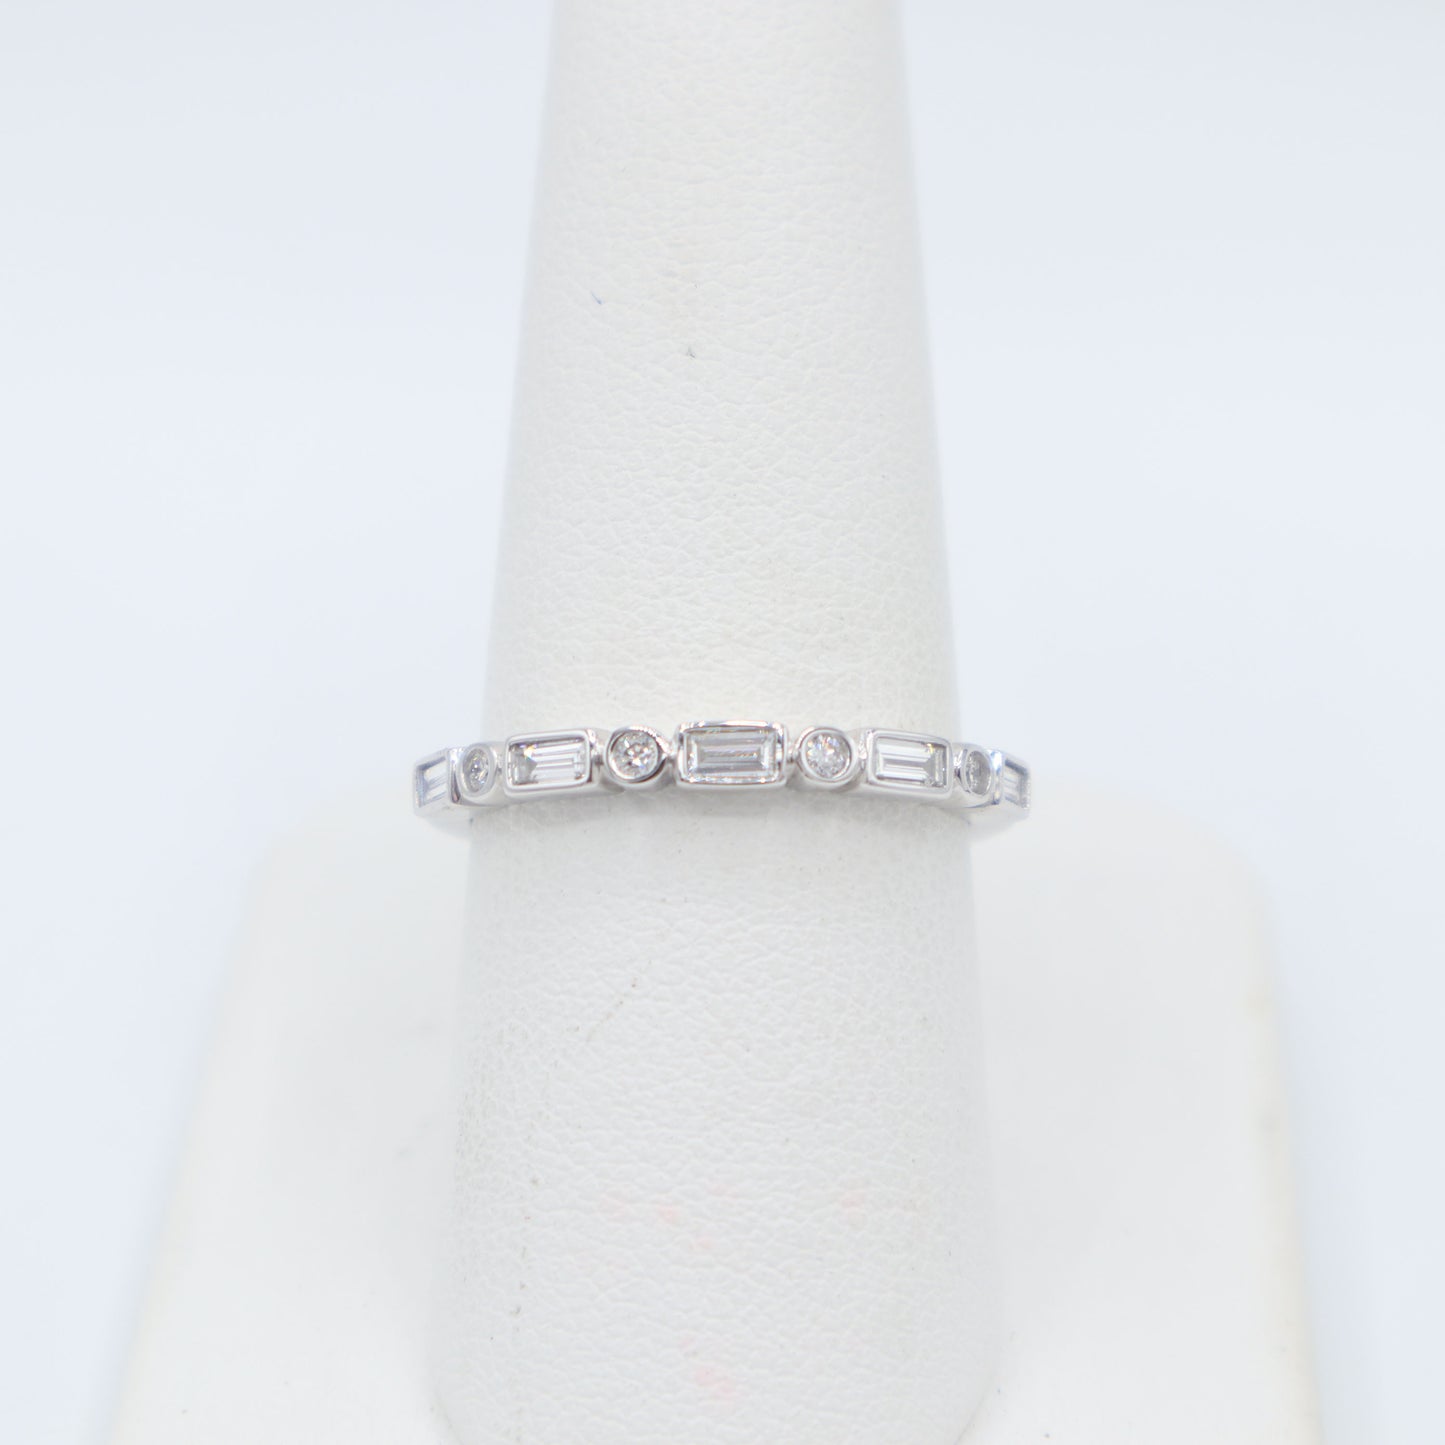 Baguette and Round Diamond Band in White Gold